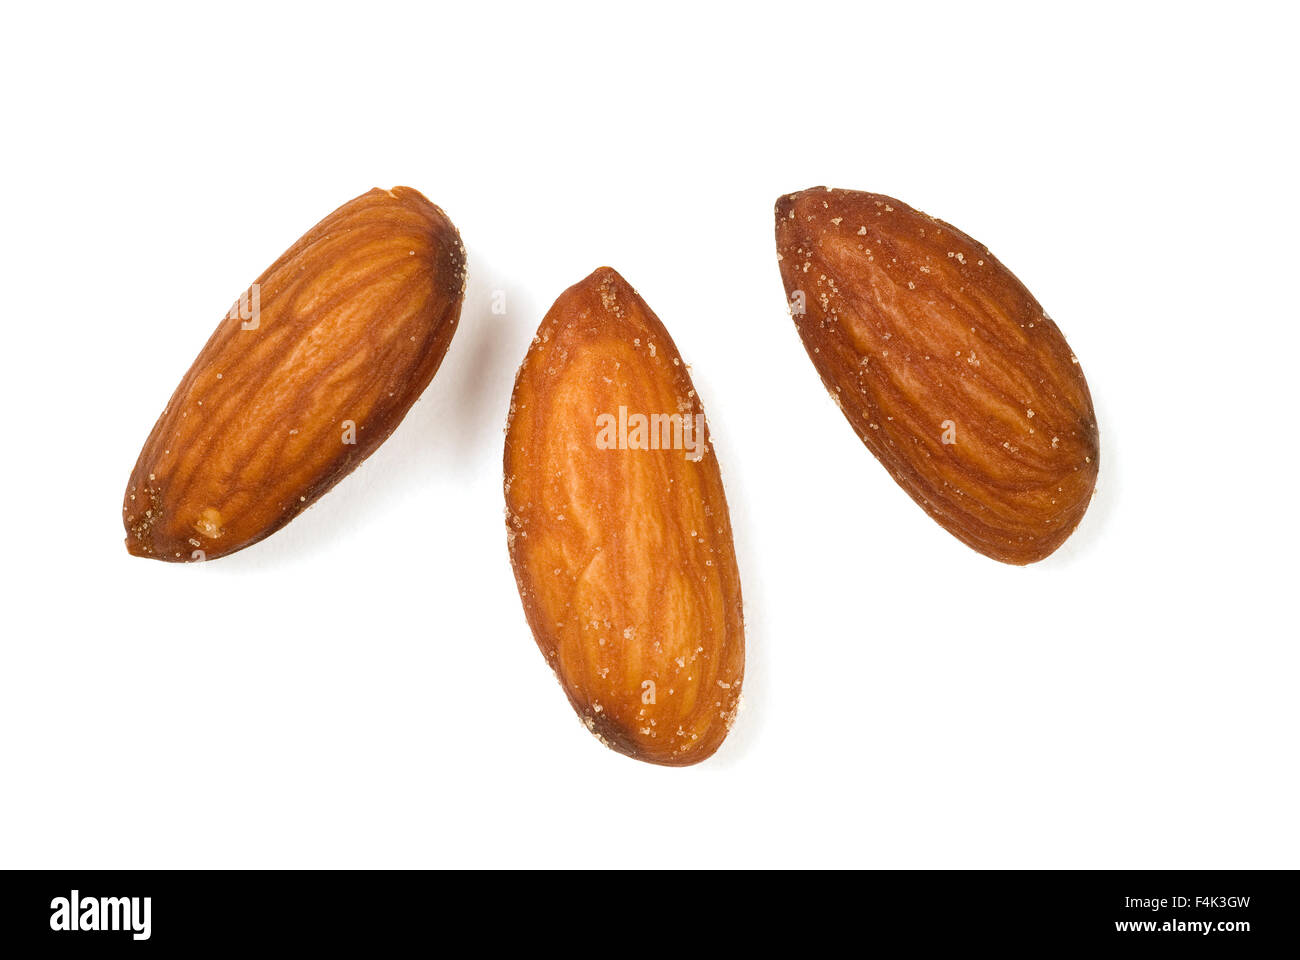 Three Salted Almonds Isolated on a white background. Stock Photo